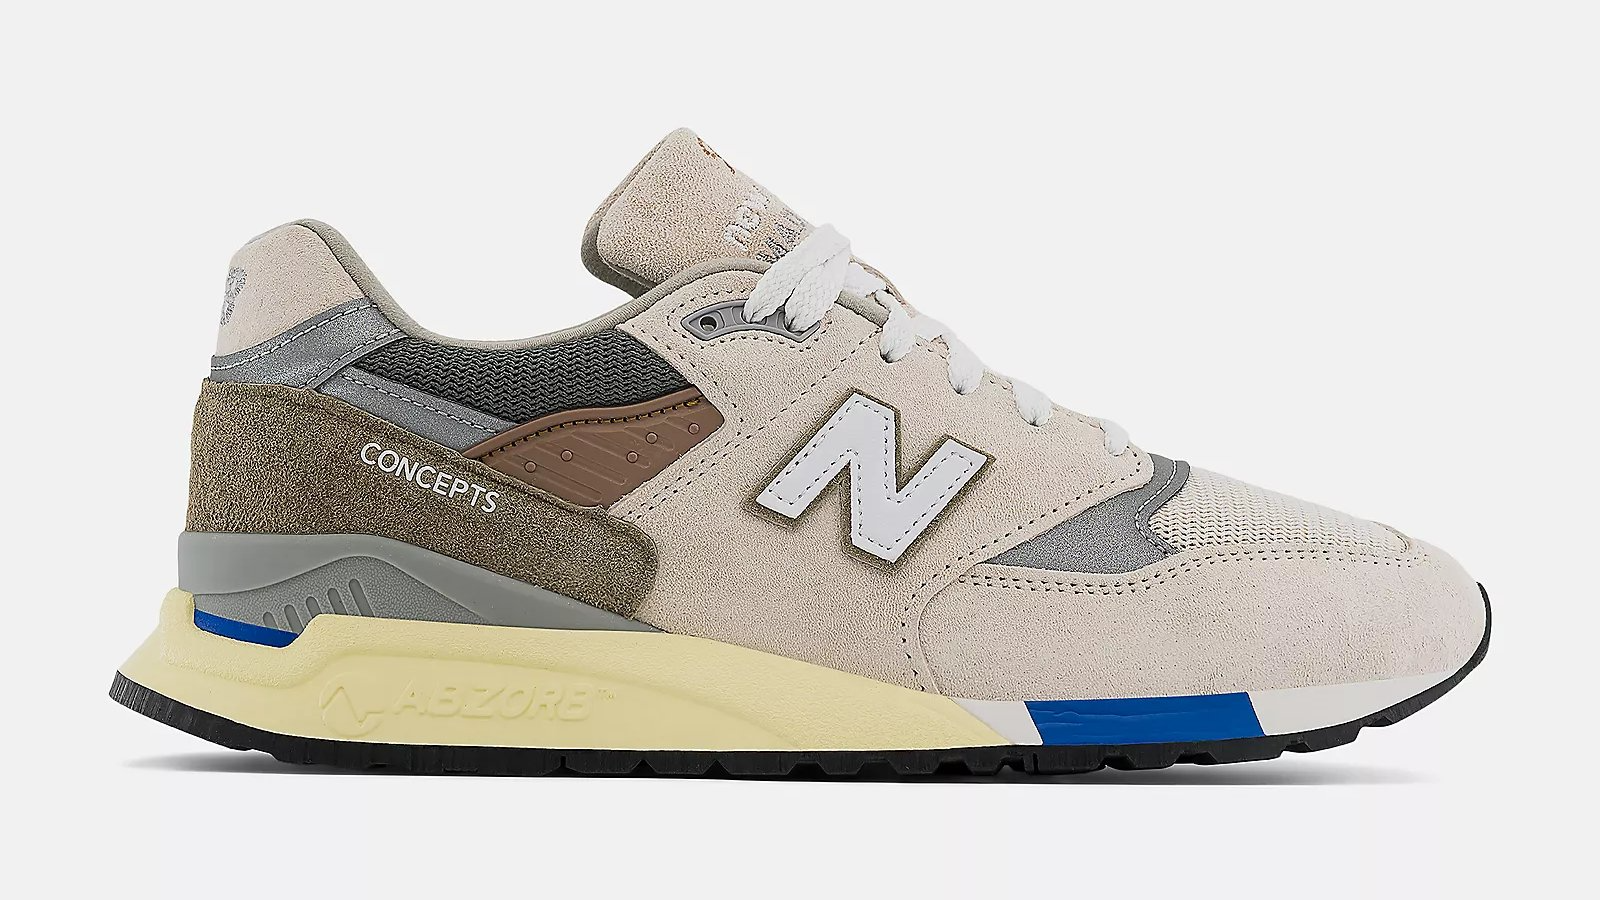 Now Available: Concepts x New Balance 998 